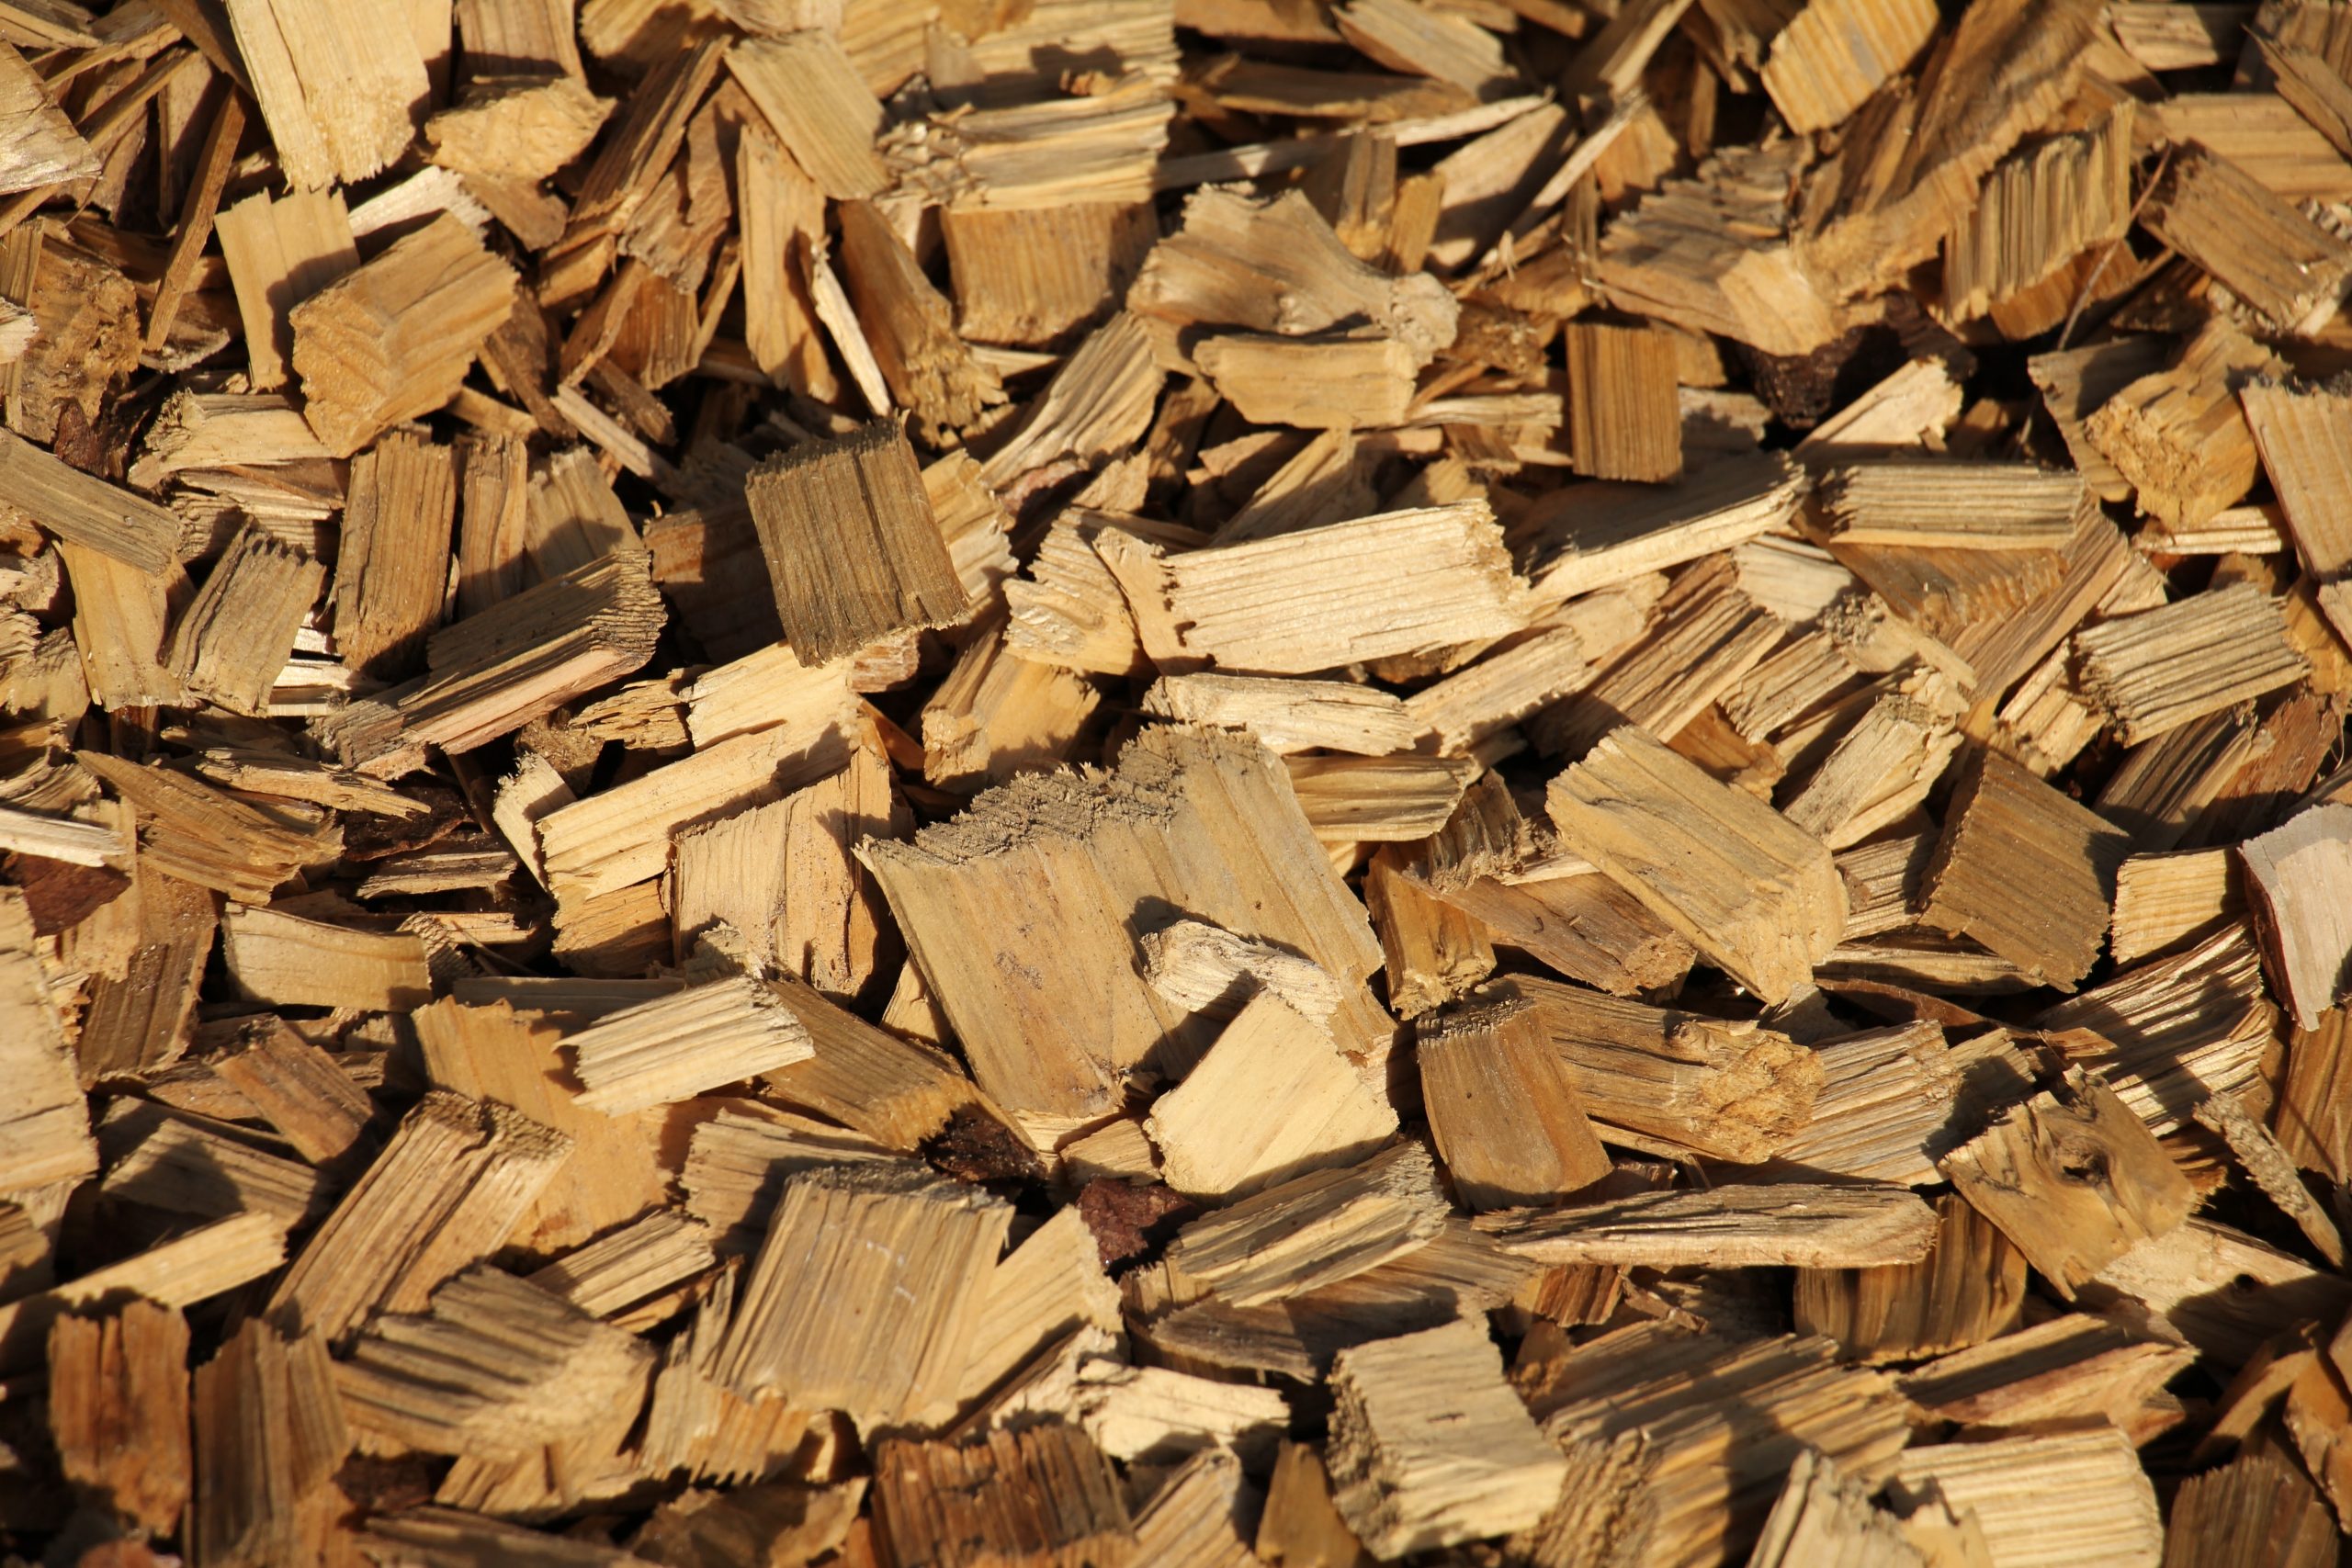 What To Do With Wood Chips From Chipper? (Here are 10 Ways To Use Them)